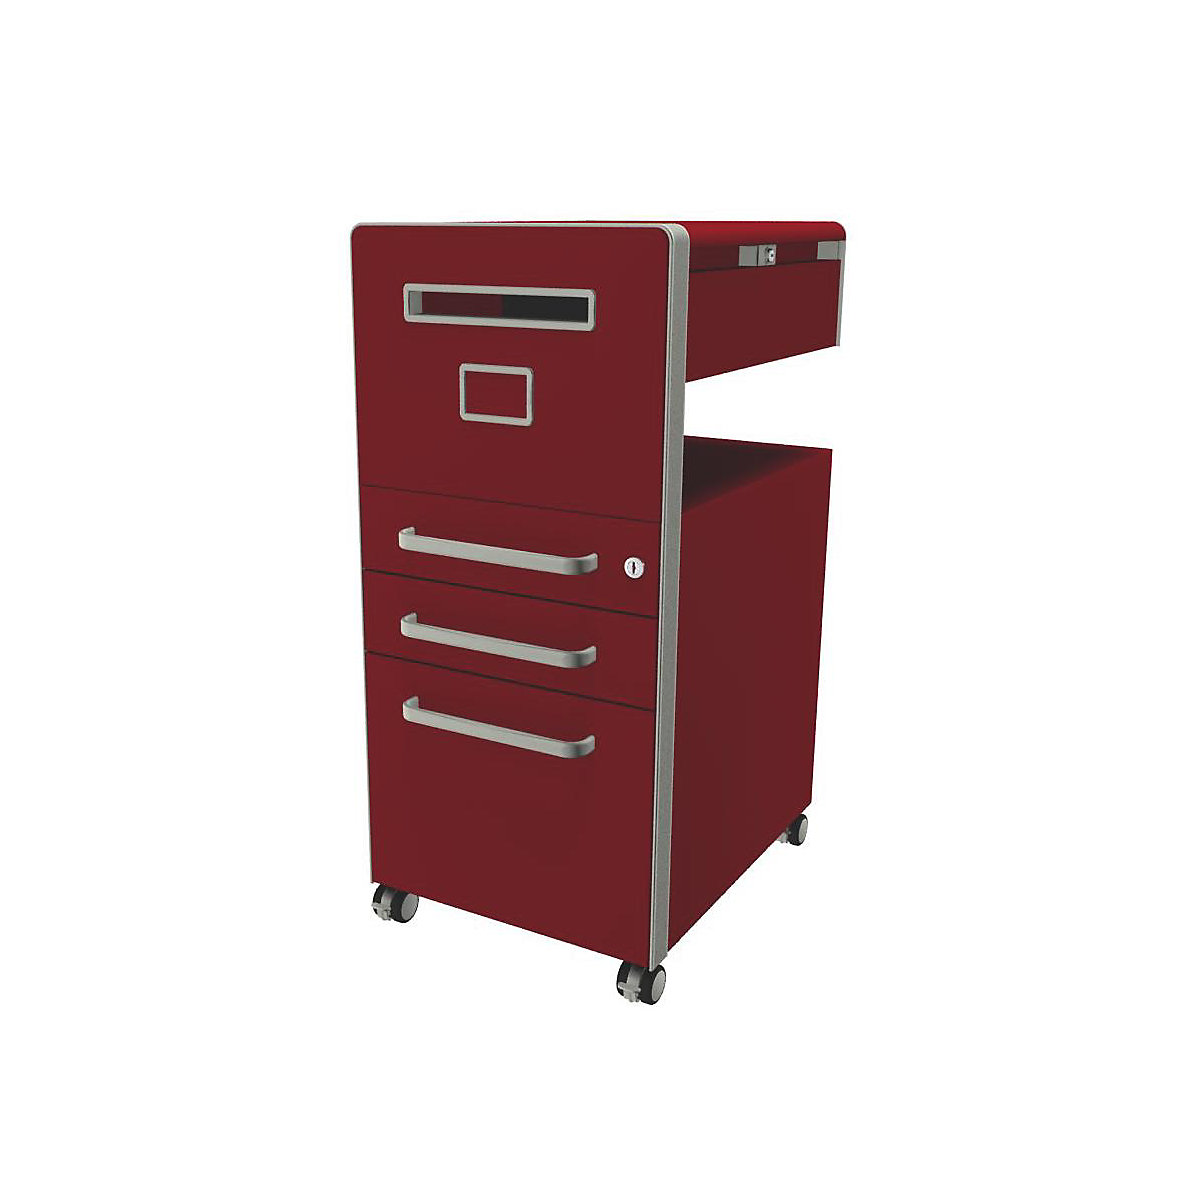 Bite™ pedestal furniture, with 1 whiteboard, opens on the left side – BISLEY, with 2 universal drawers, 1 suspension file drawer, cardinal red-1